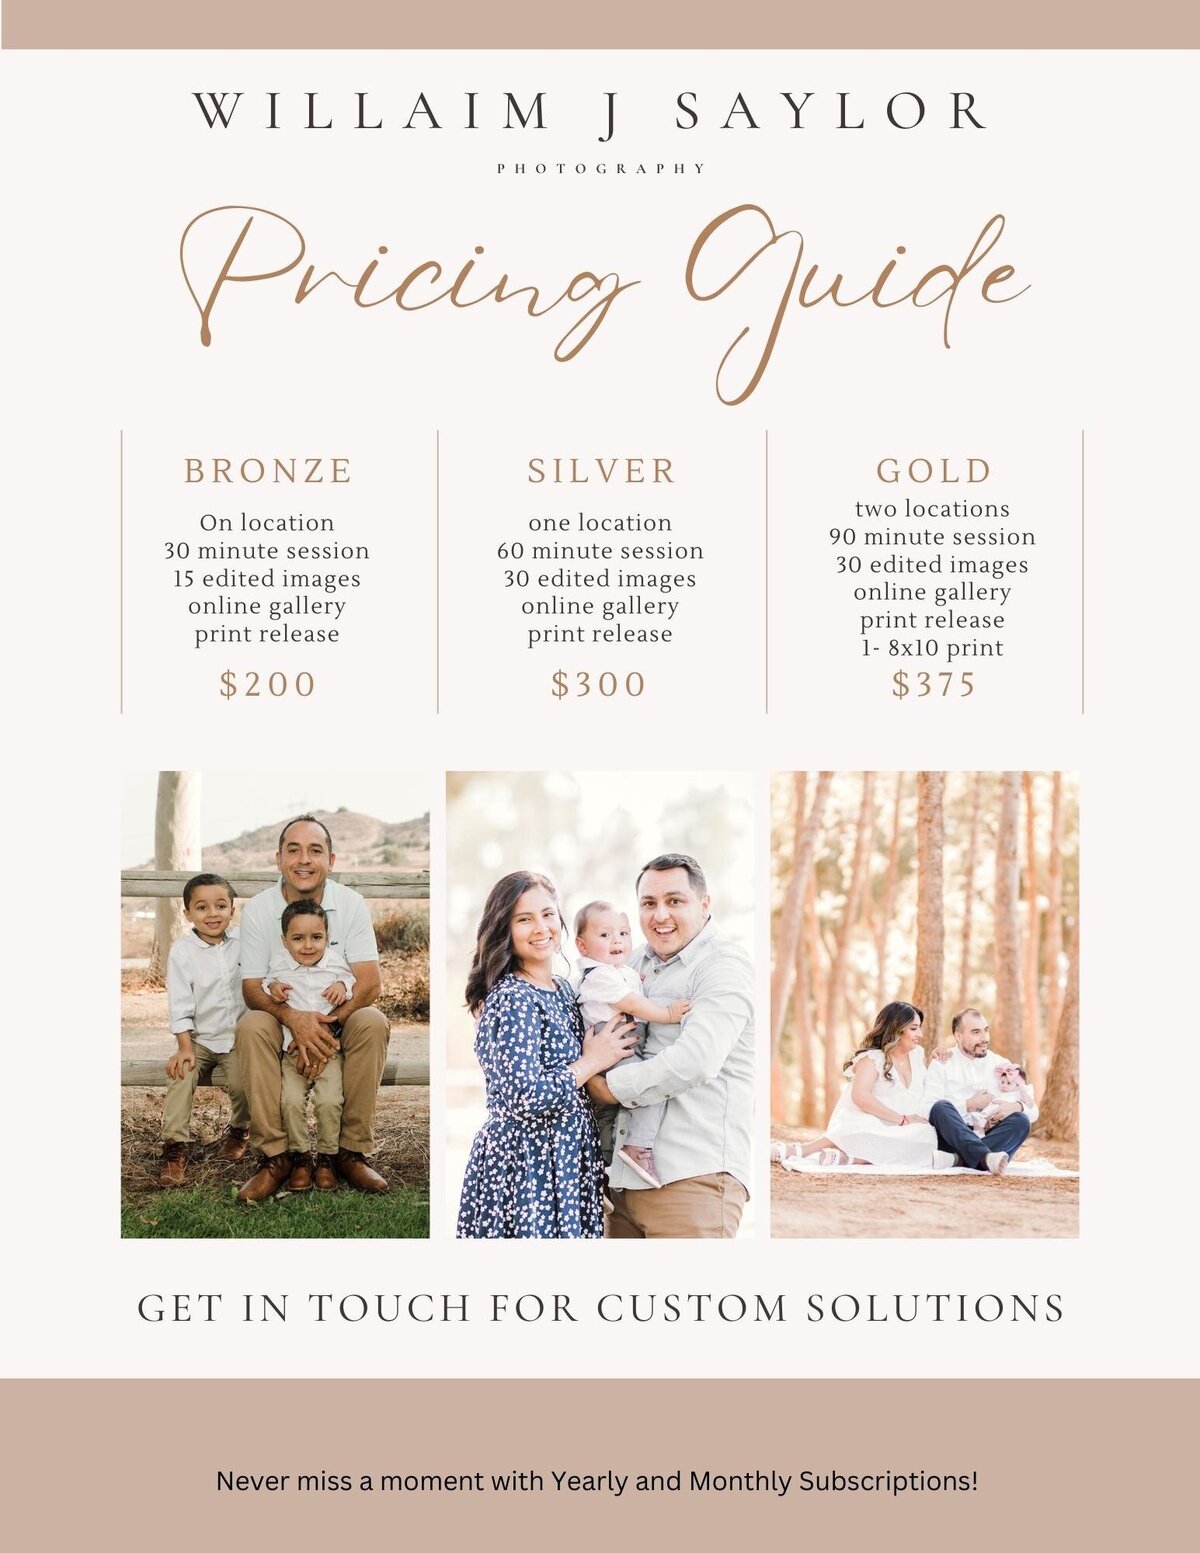 Pricing plans for Family Portraits in Orange County and Inland Empire